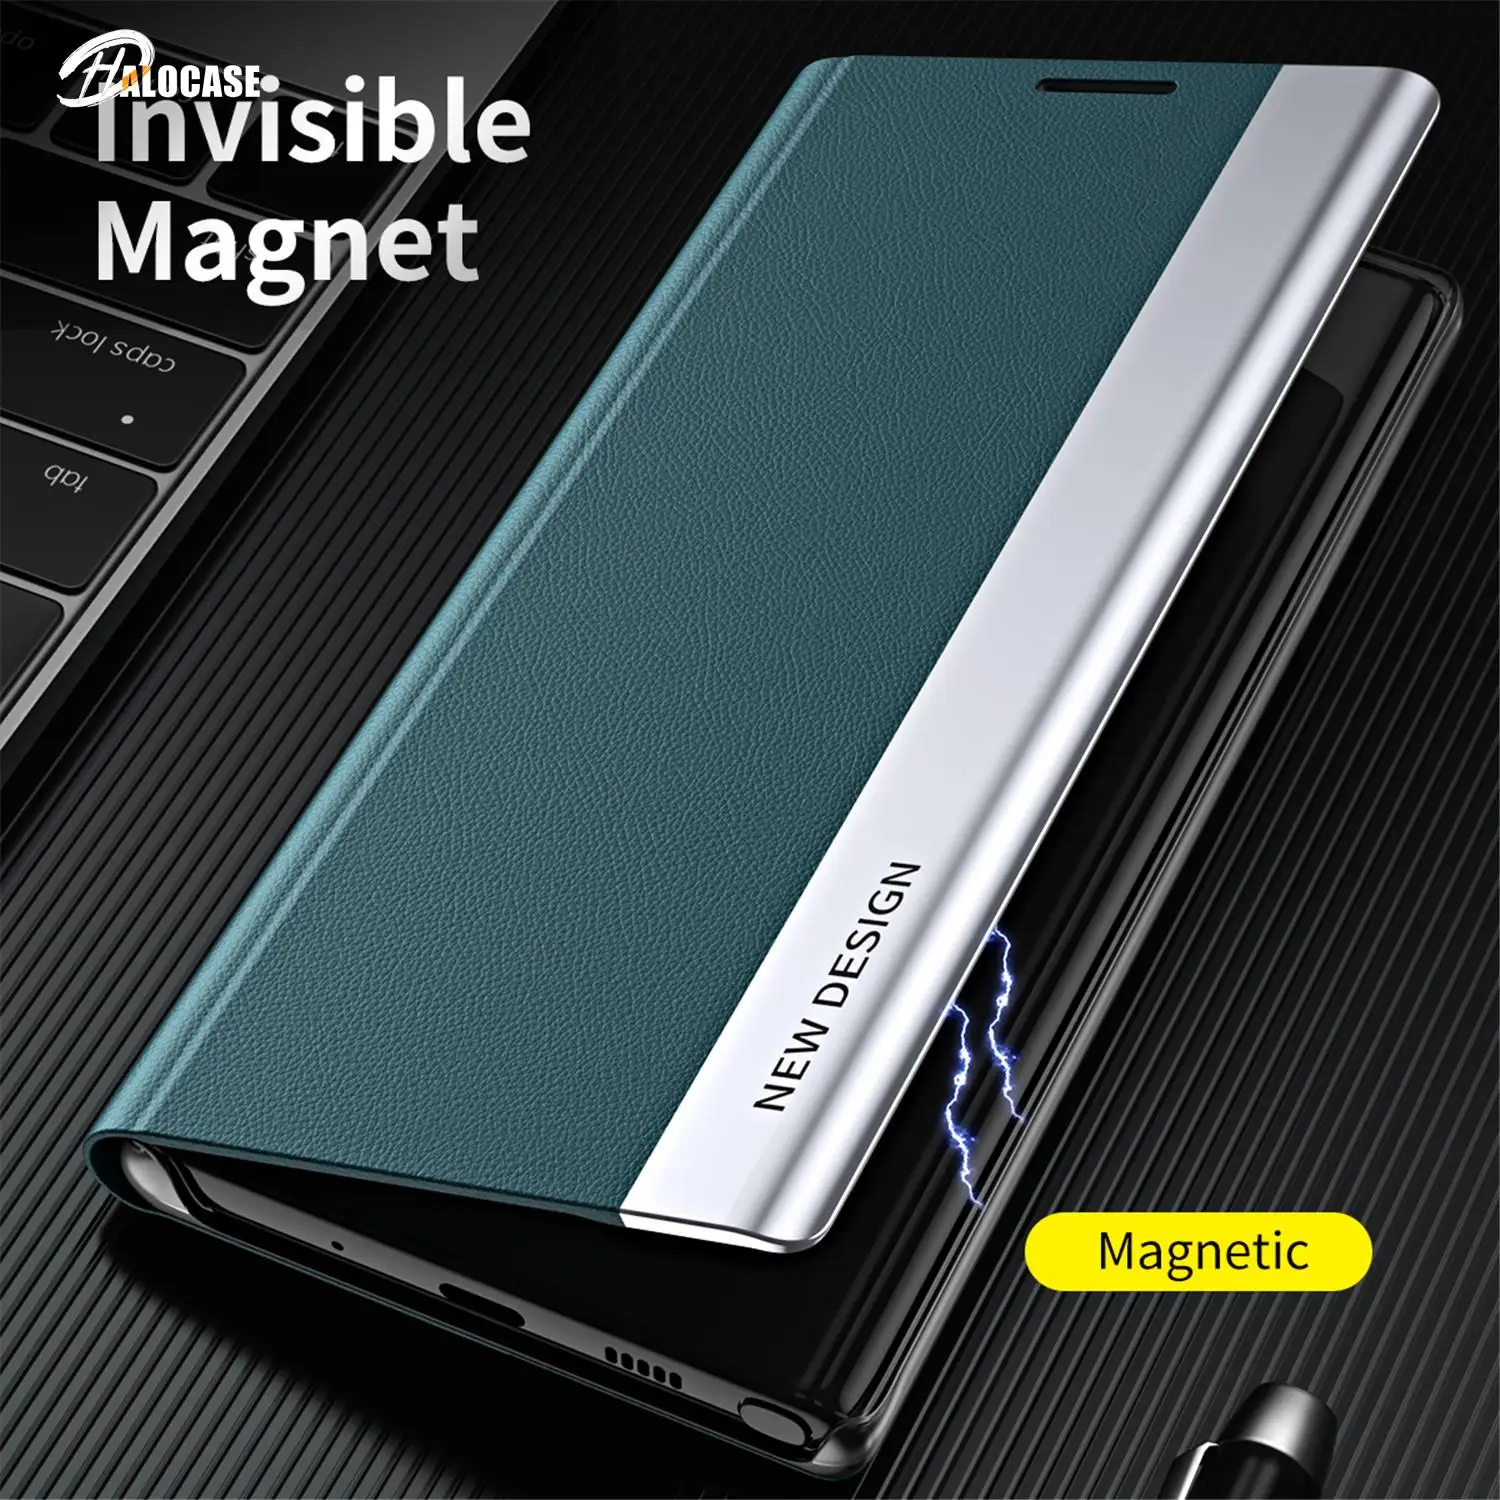 

Flip Magnetic Case For Xiaomi 11T 11Pro Redmi Note 10S 9S 8T Pro Max 10 9A 9C 9T K40 Luxury Stand Book Cover Phone Coque Bag